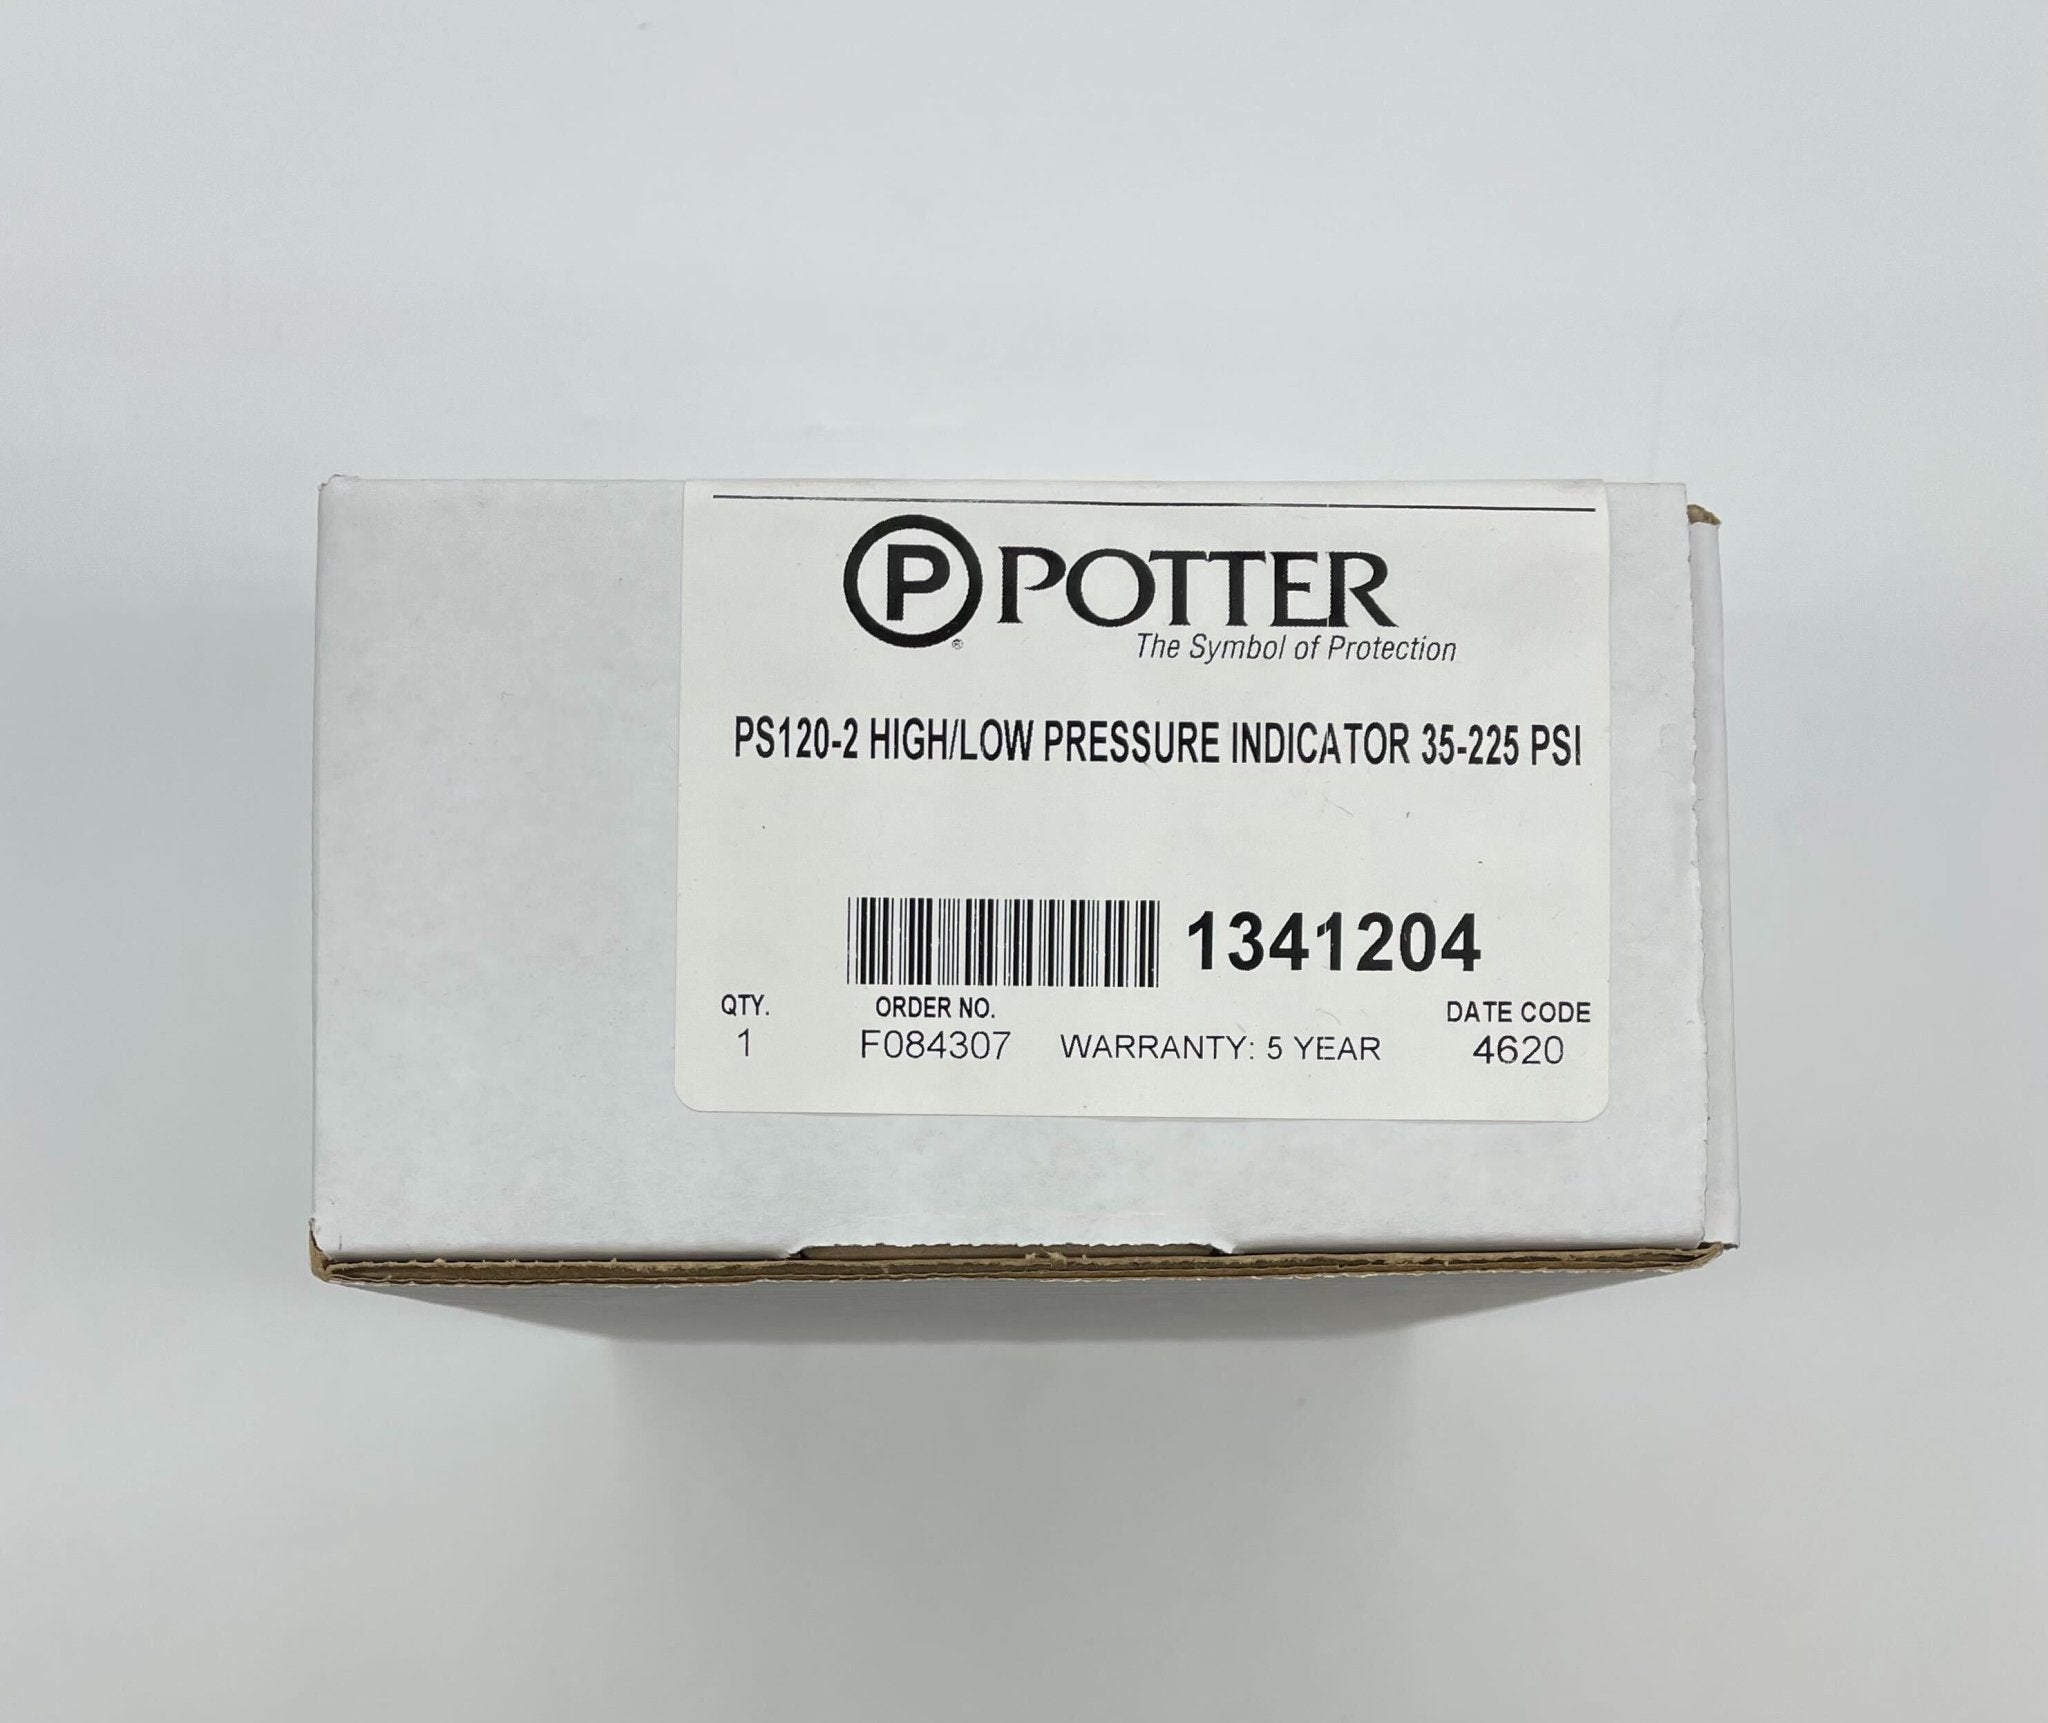 Potter PS120-2 High/Low, 60-175 PSI, DPDT - The Fire Alarm Supplier